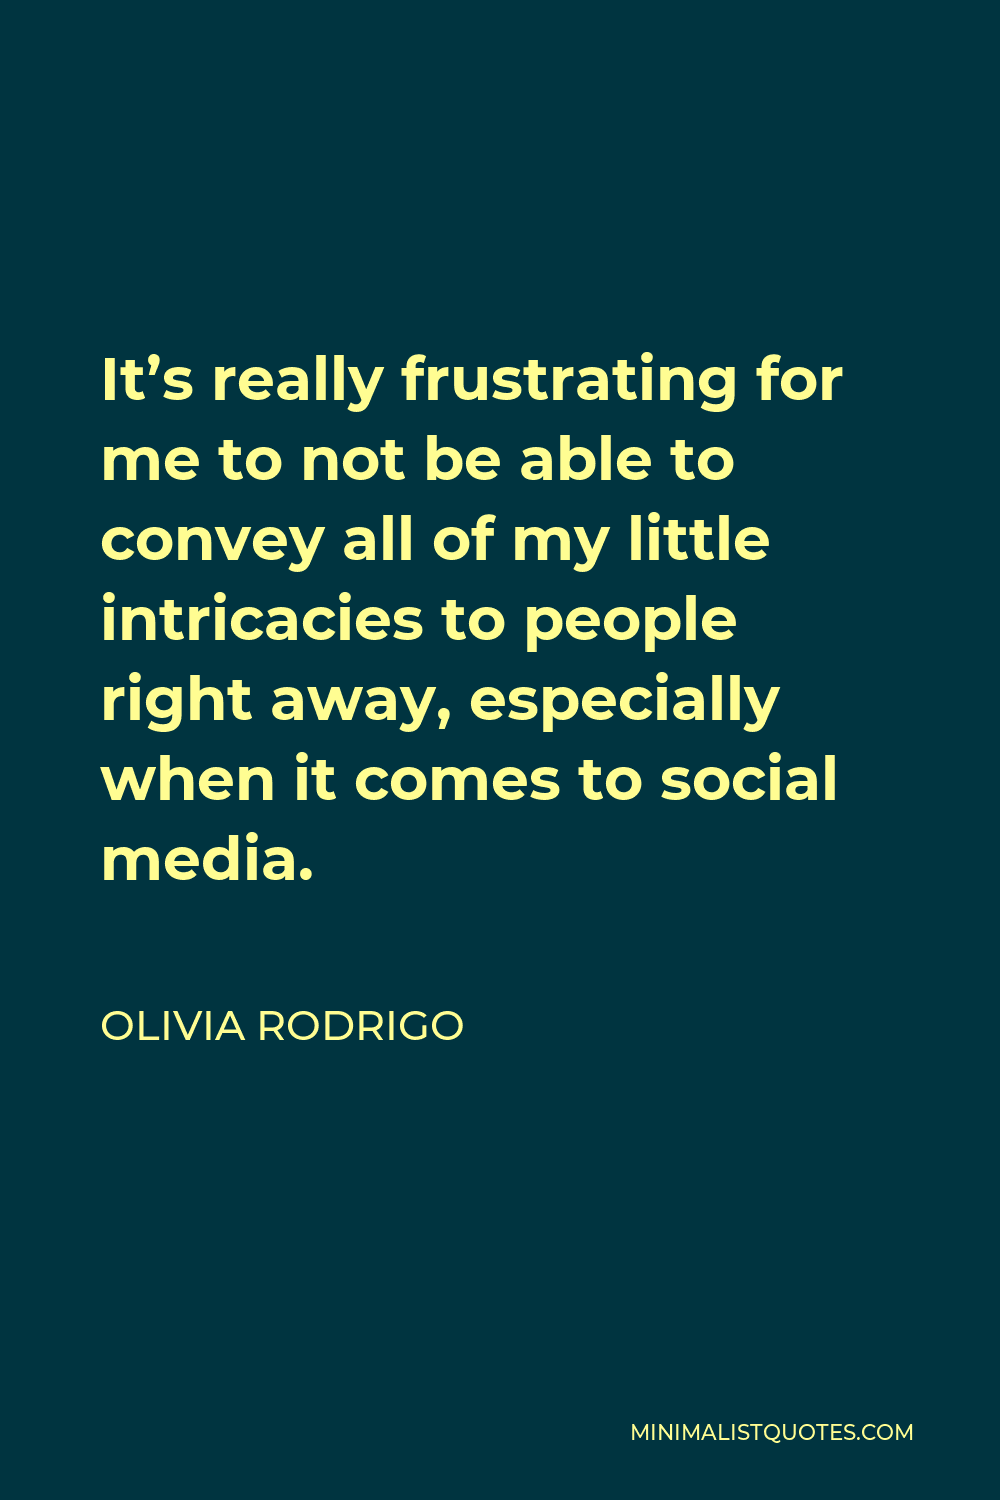 Olivia Rodrigo Quote - It’s really frustrating for me to not be able to convey all of my little intricacies to people right away, especially when it comes to social media.